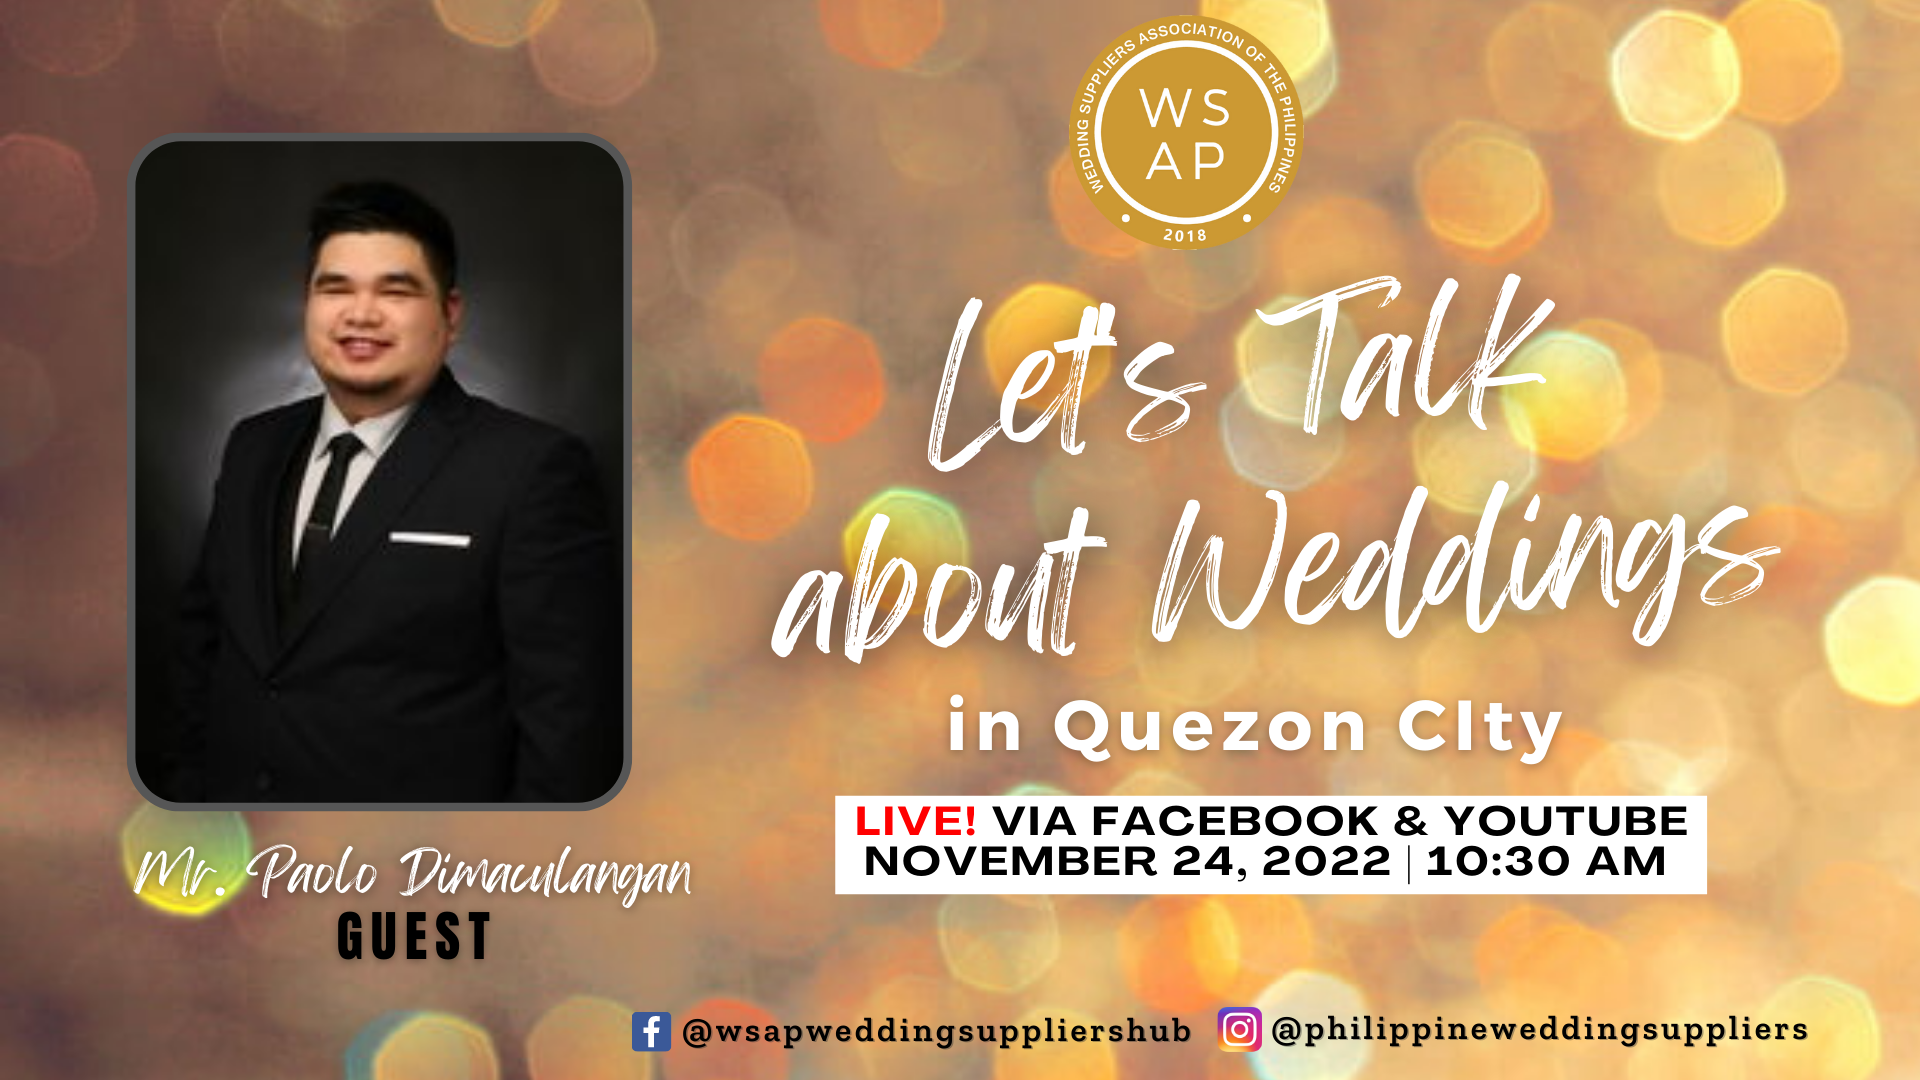 Let's Talk About Weddings in Quezon City with Poalo Dimaculangan